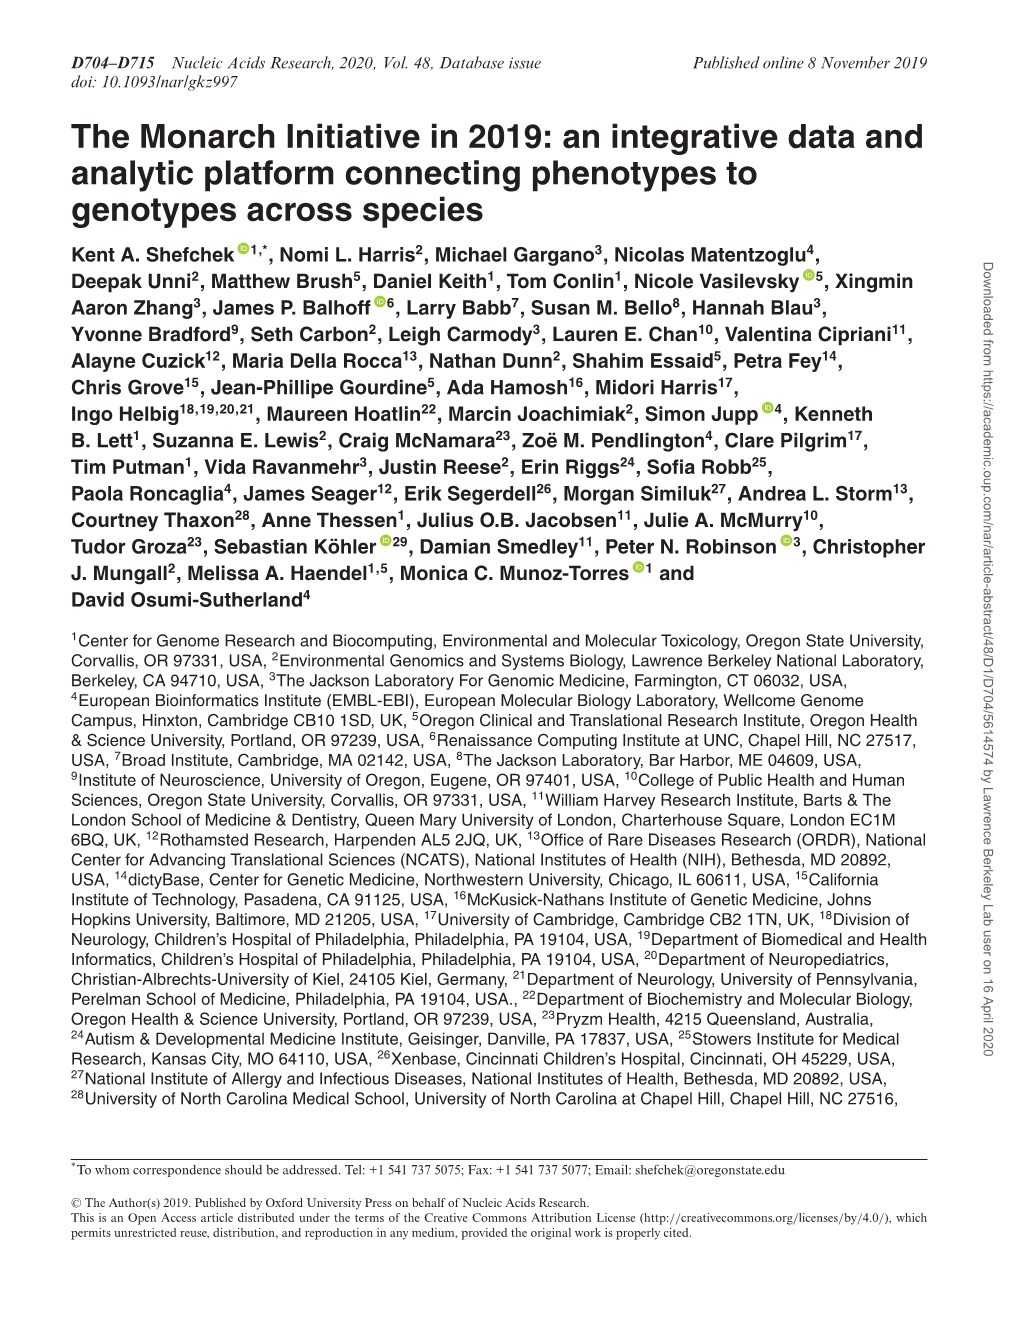 The Monarch Initiative in 2019: an Integrative Data and Analytic Platform Connecting Phenotypes to Genotypes Across Species